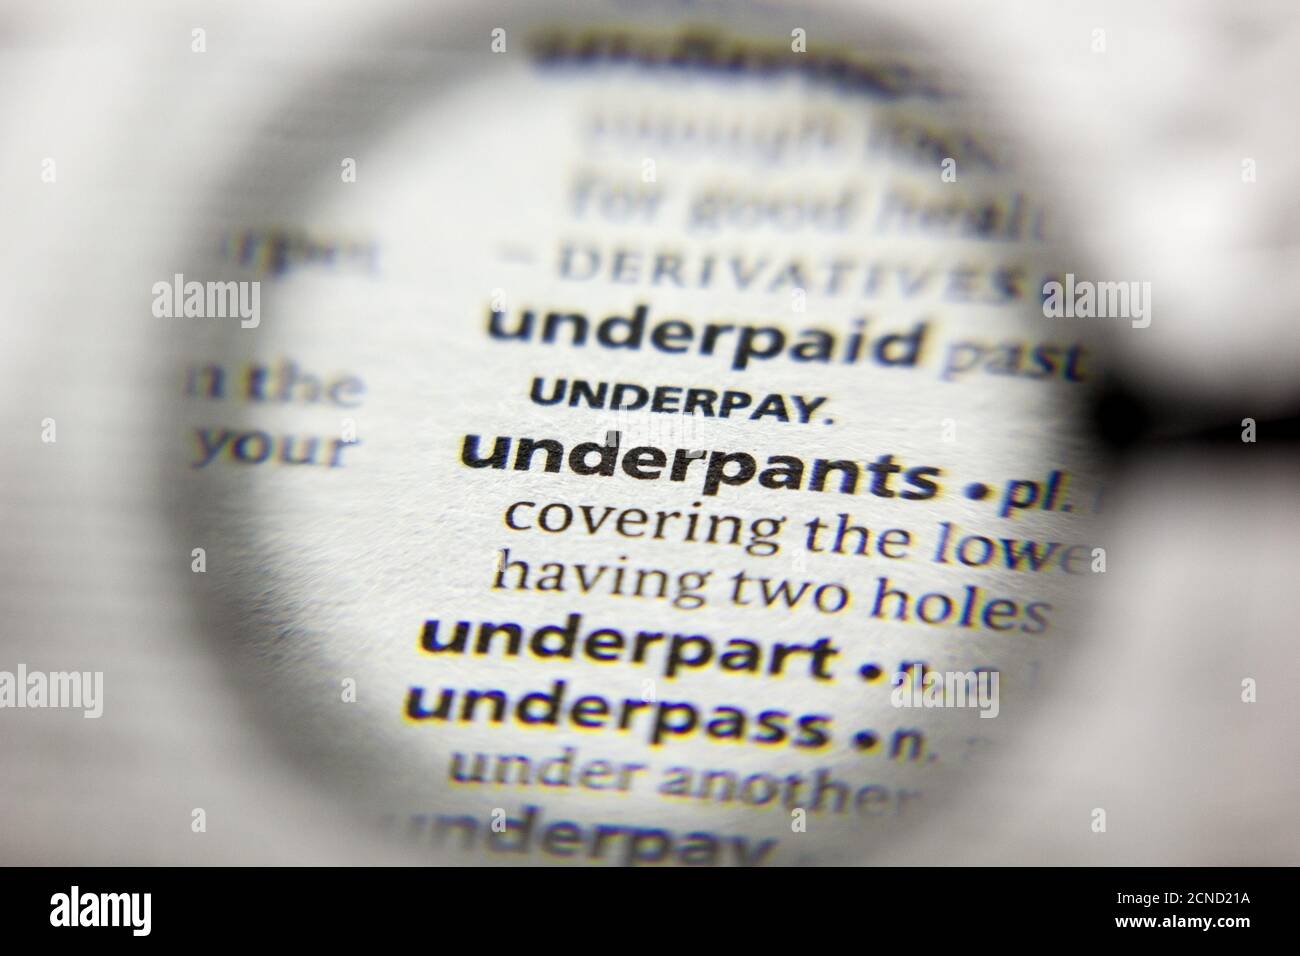 https://c8.alamy.com/comp/2CND21A/the-word-or-phrase-underpants-in-a-dictionary-2CND21A.jpg